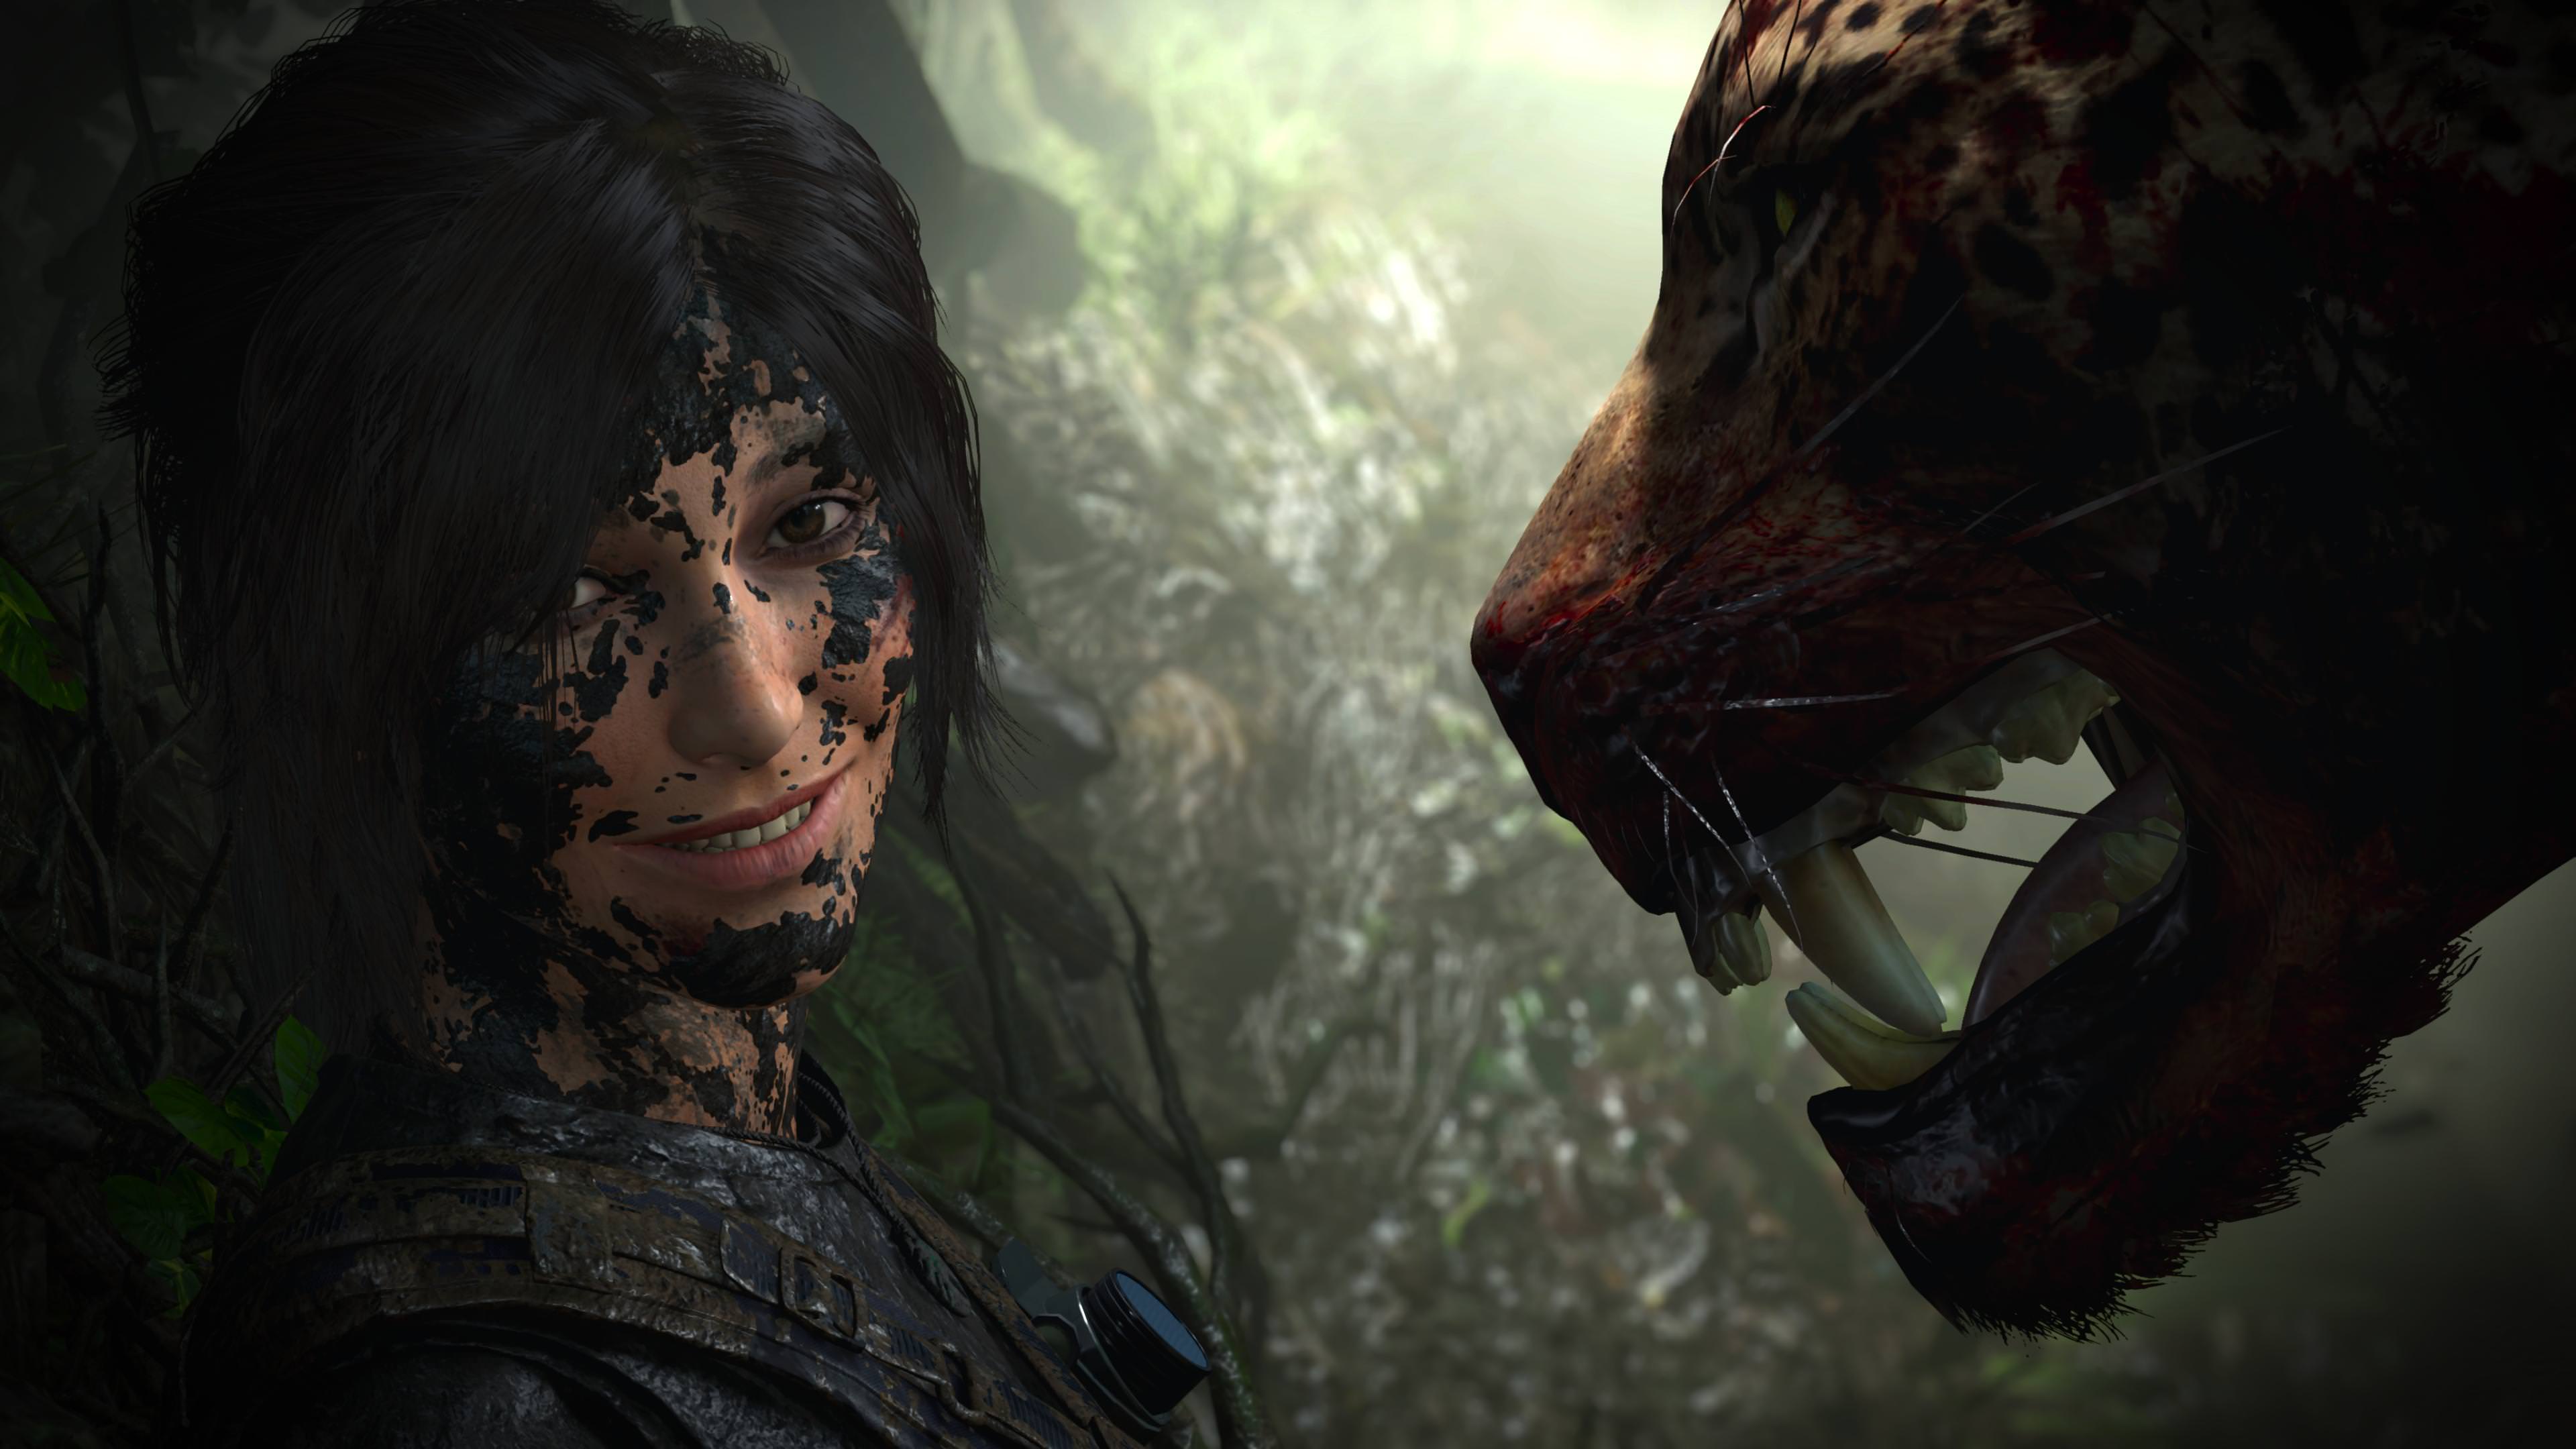 Shadow of the Tomb Raiderâ€™s photo mode lets you put a creepy smile on